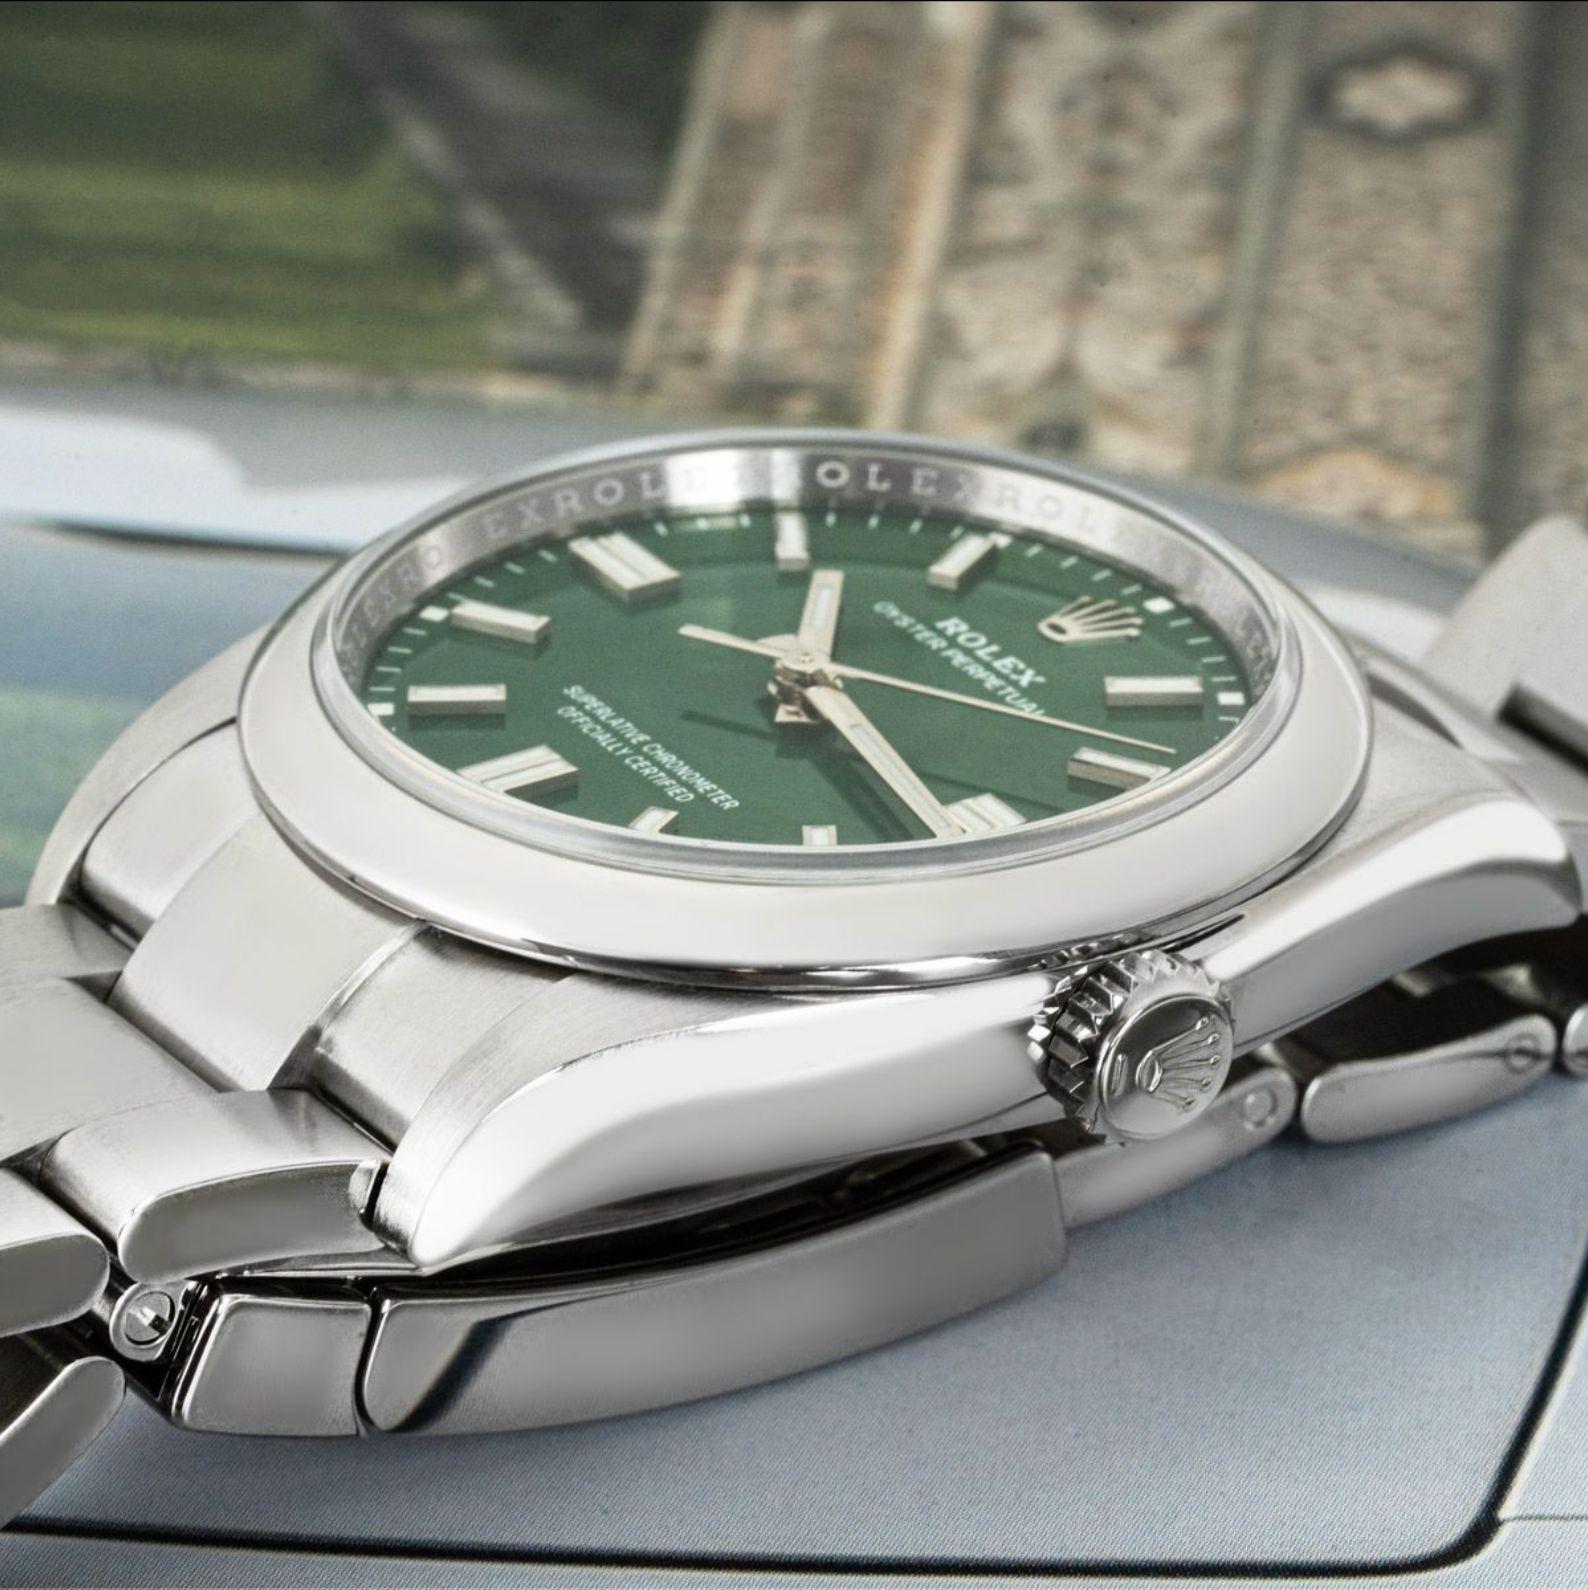 A 36mm Oyster Perpetual crafted in steel by Rolex. Featuring a green dial with applied hour markers and smooth stainless steel bezel. Fitted with scratch-resistant sapphire crystal, a self-winding automatic movement and an Oyster bracelet equipped